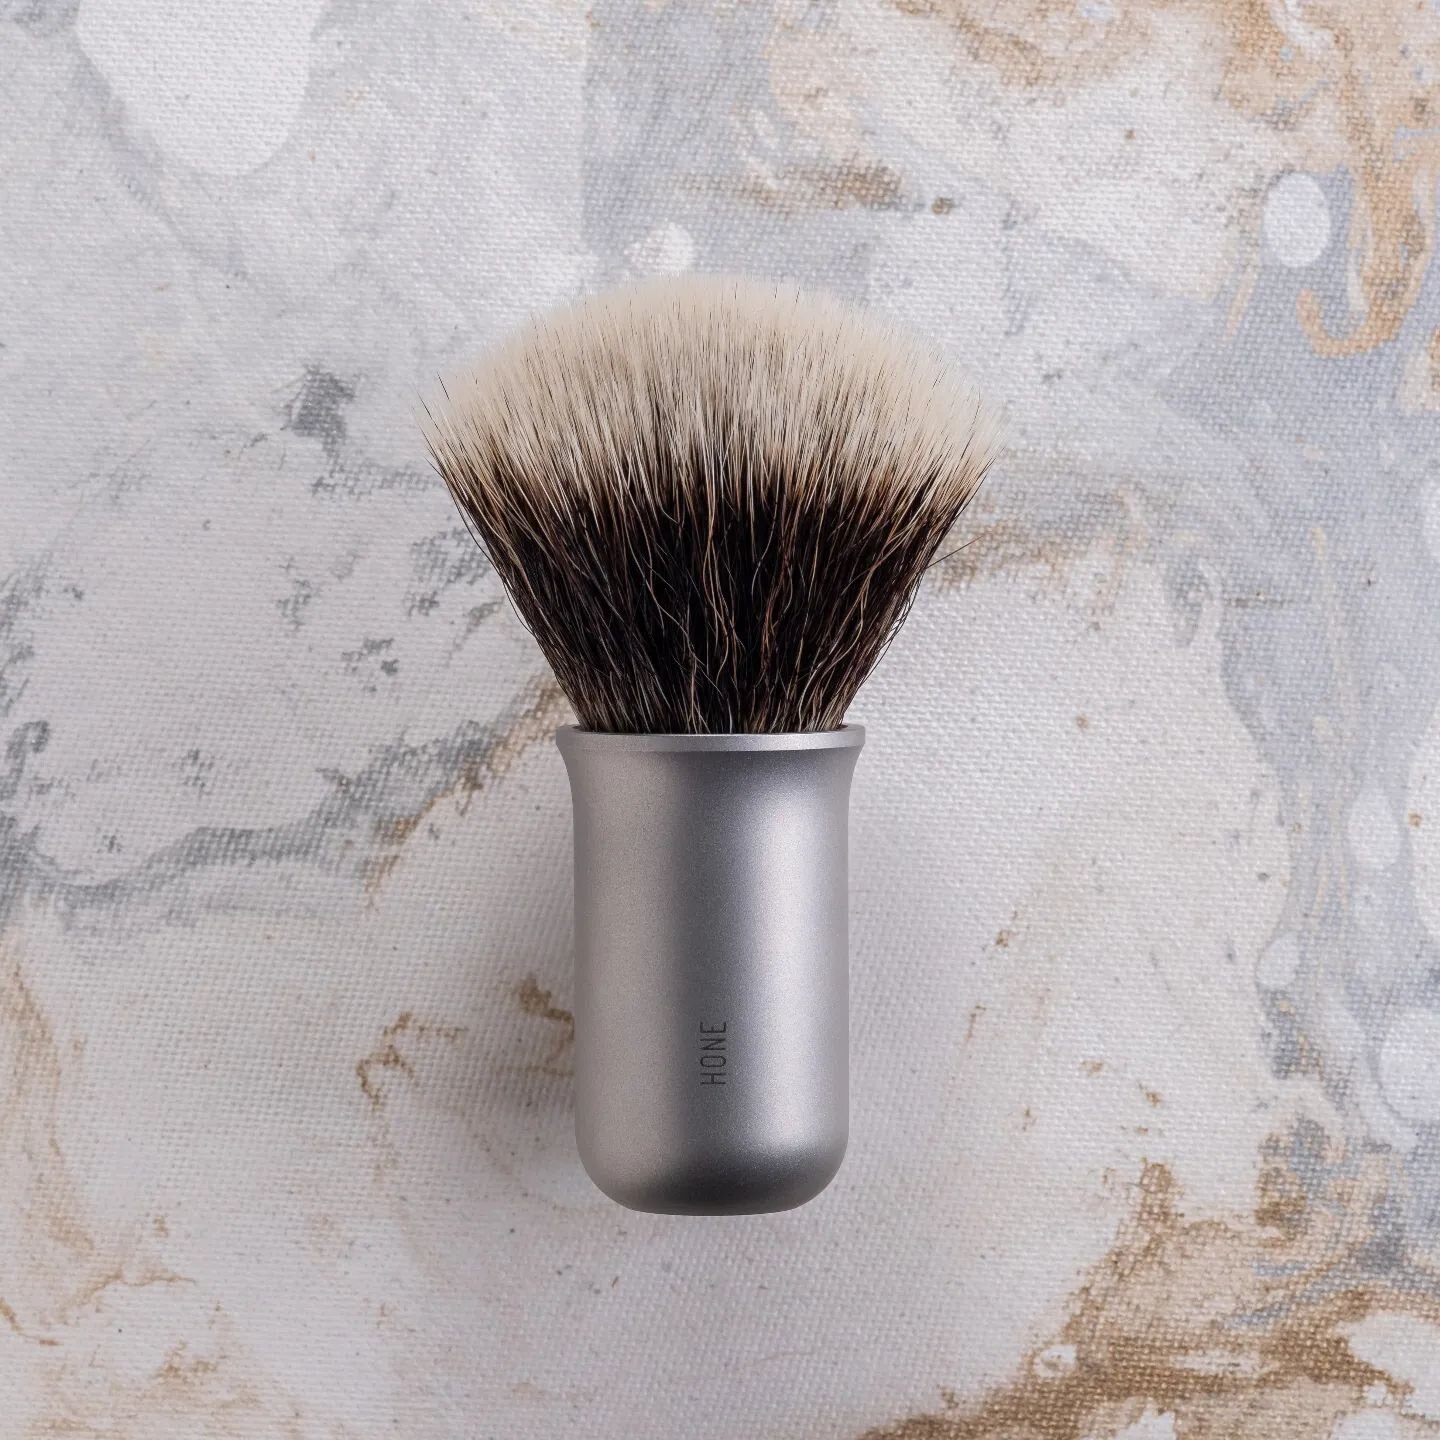 Hone Type B with an @apshaving G5C premium synthetic installed. #shavingbrush #shaving #shavingbrushknots #lather #shave #shavingproducts #stainlesssteel #cncmachining #madetolast